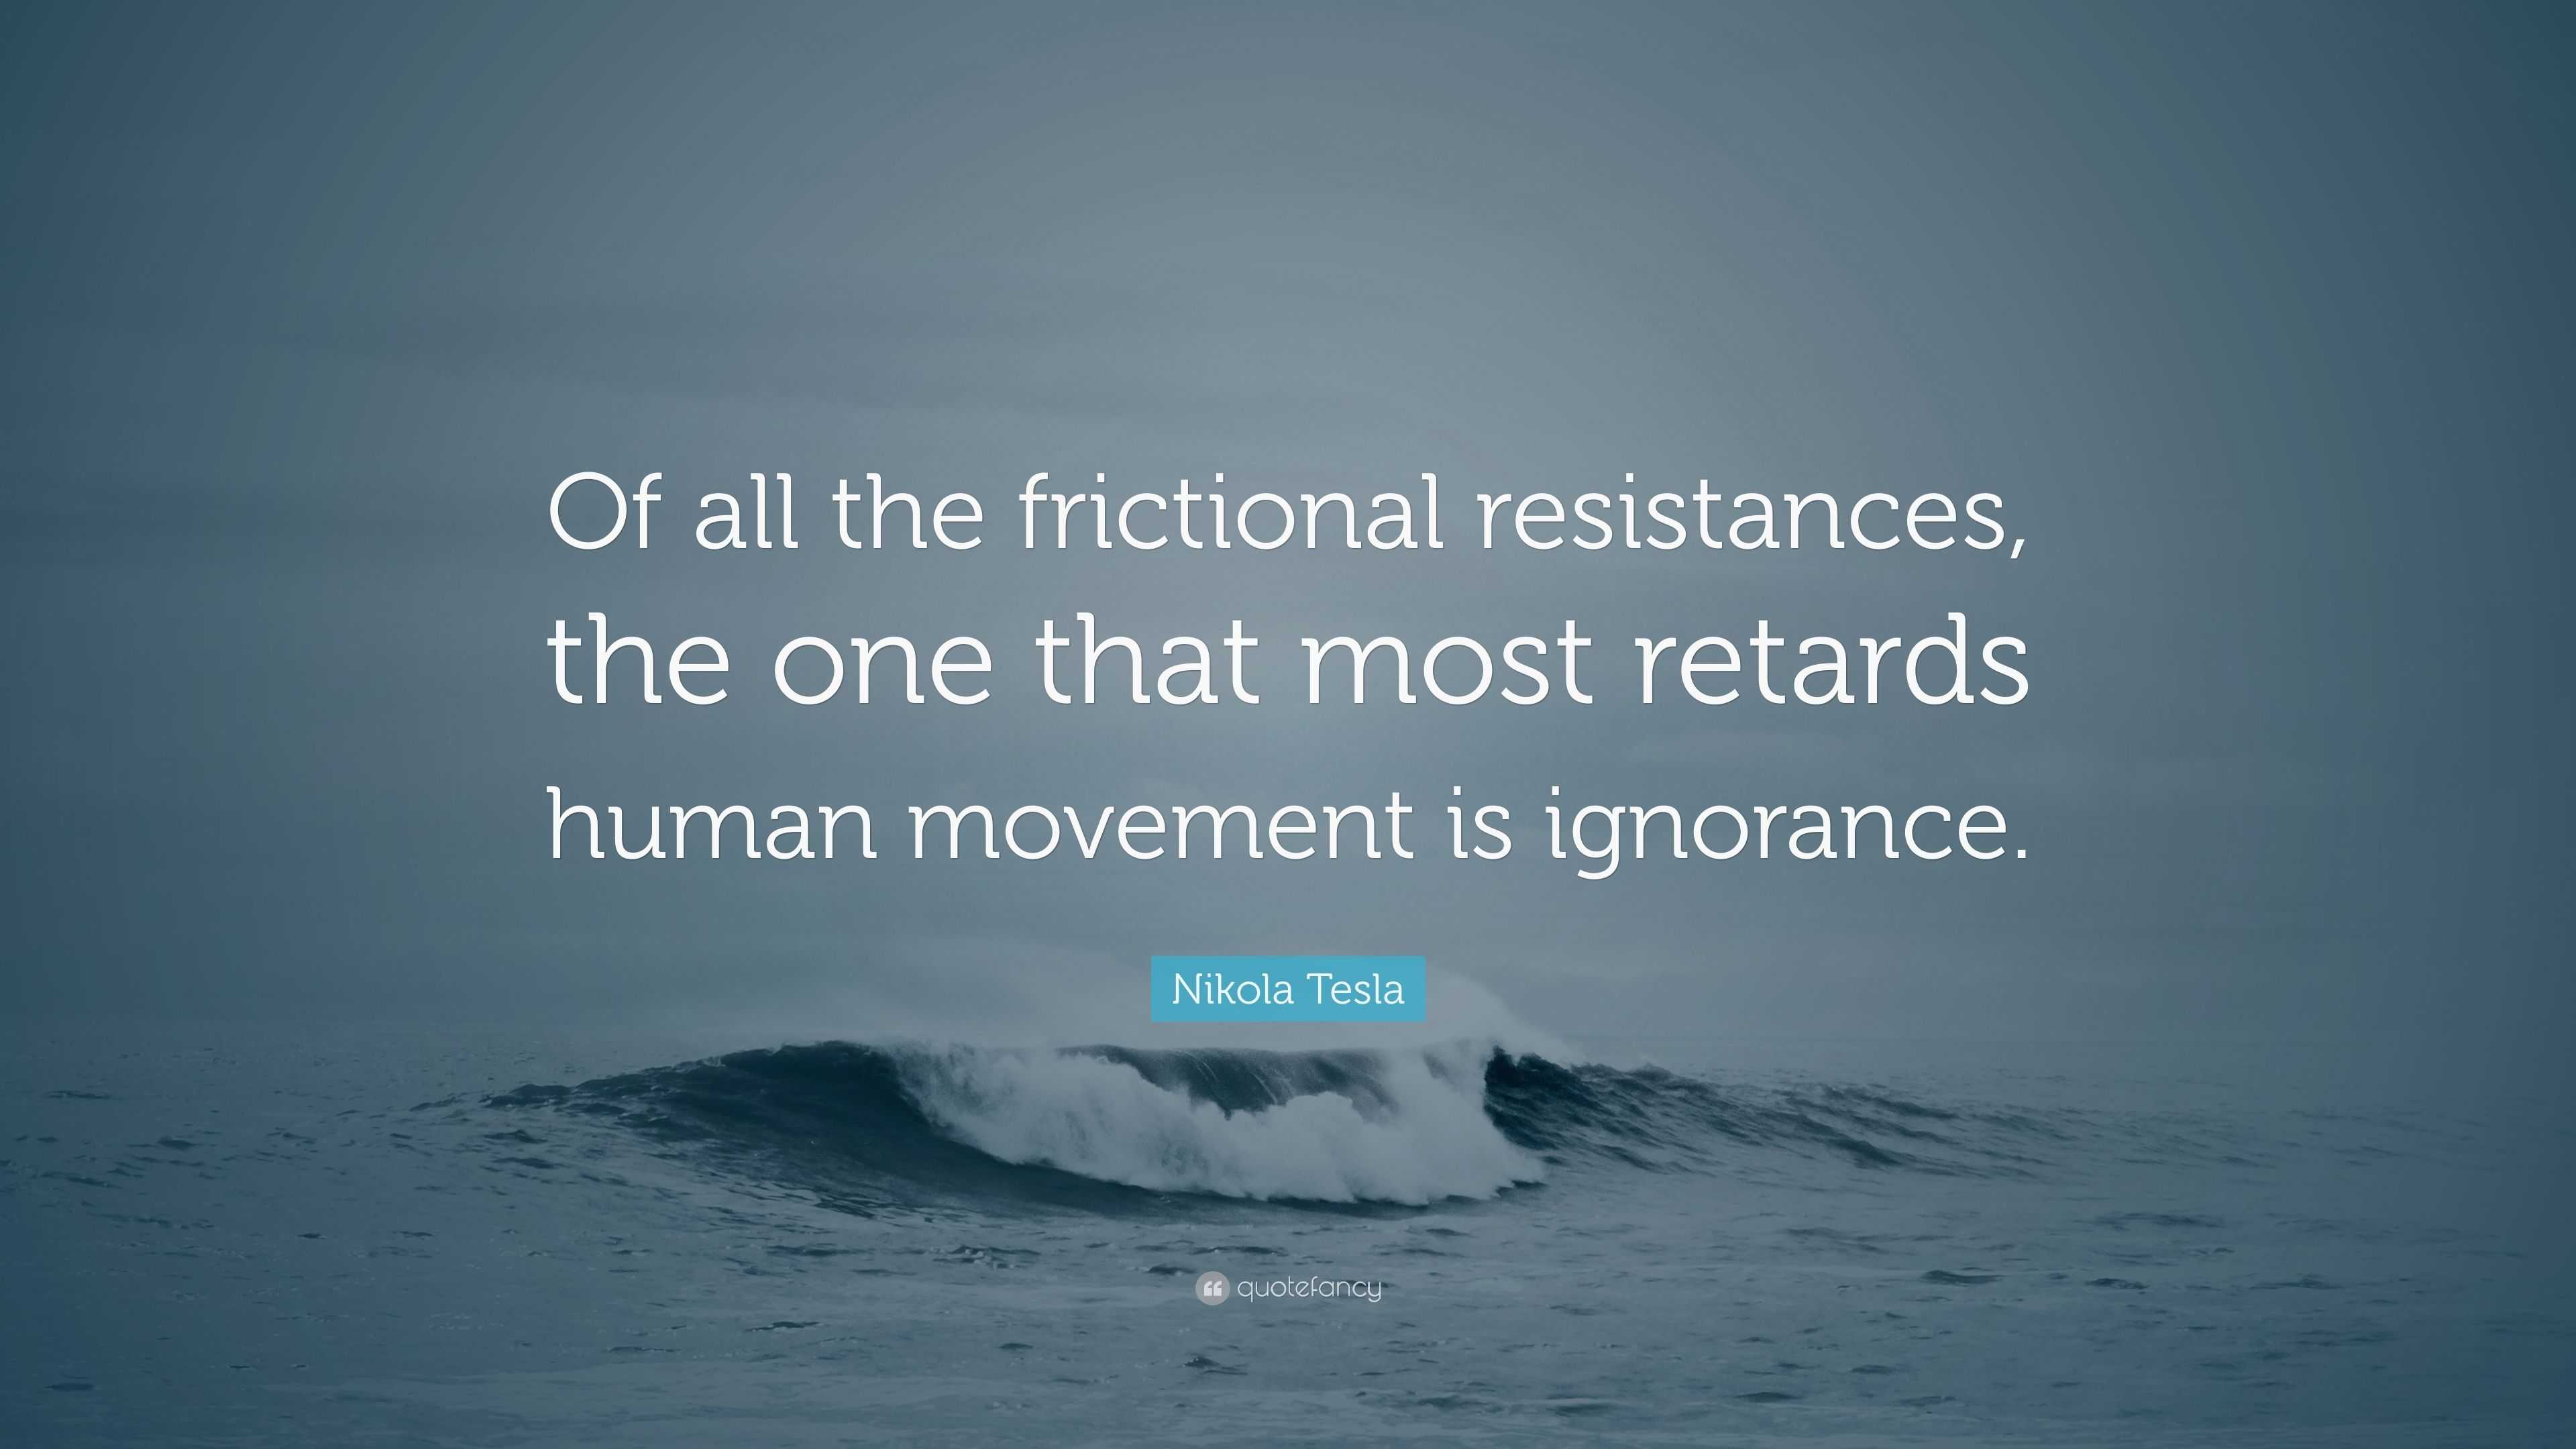 Nikola Tesla Quote: “Of all the frictional resistances, the one that ... Energy Physics Quotes